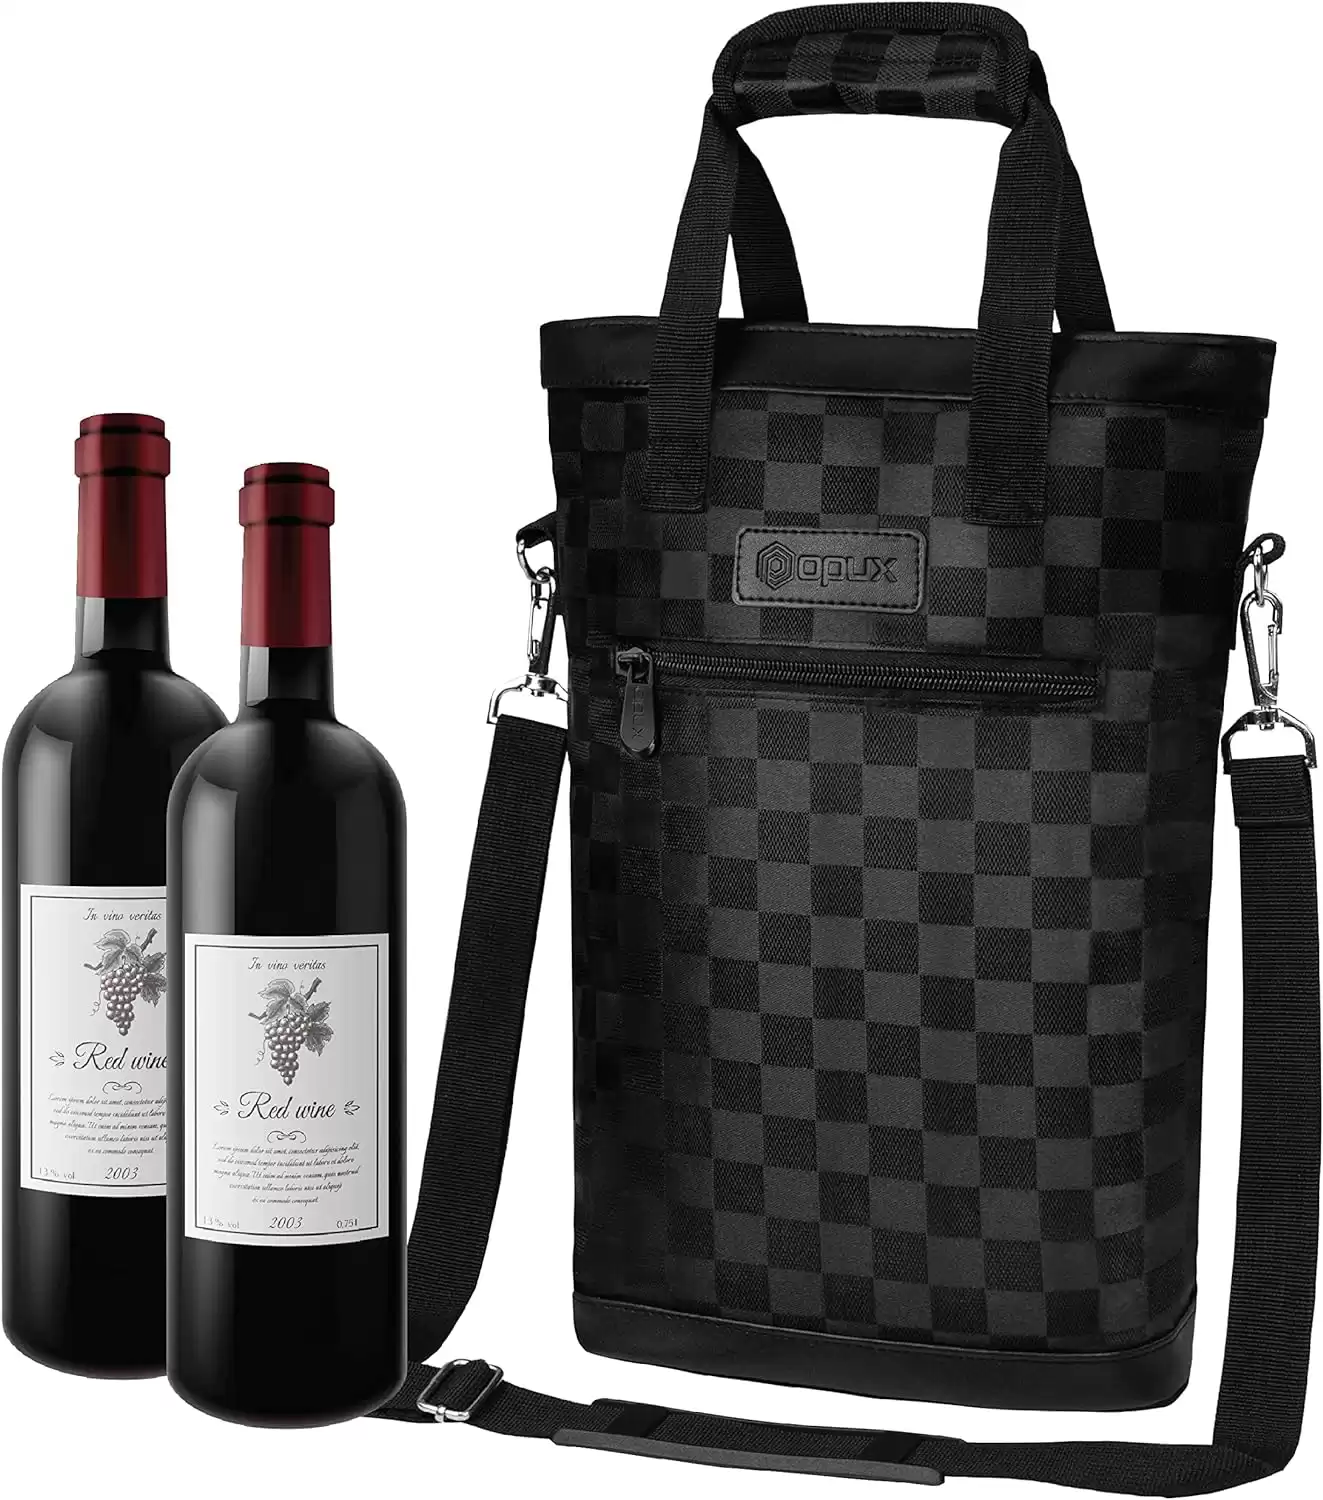 Insulated Wine Bag, Vegan Leather Wine Carrier, Thermal Wine Tote, High  Fashion Wine Bottle Tote, Gifts for Men, Classy Gift Ideas 